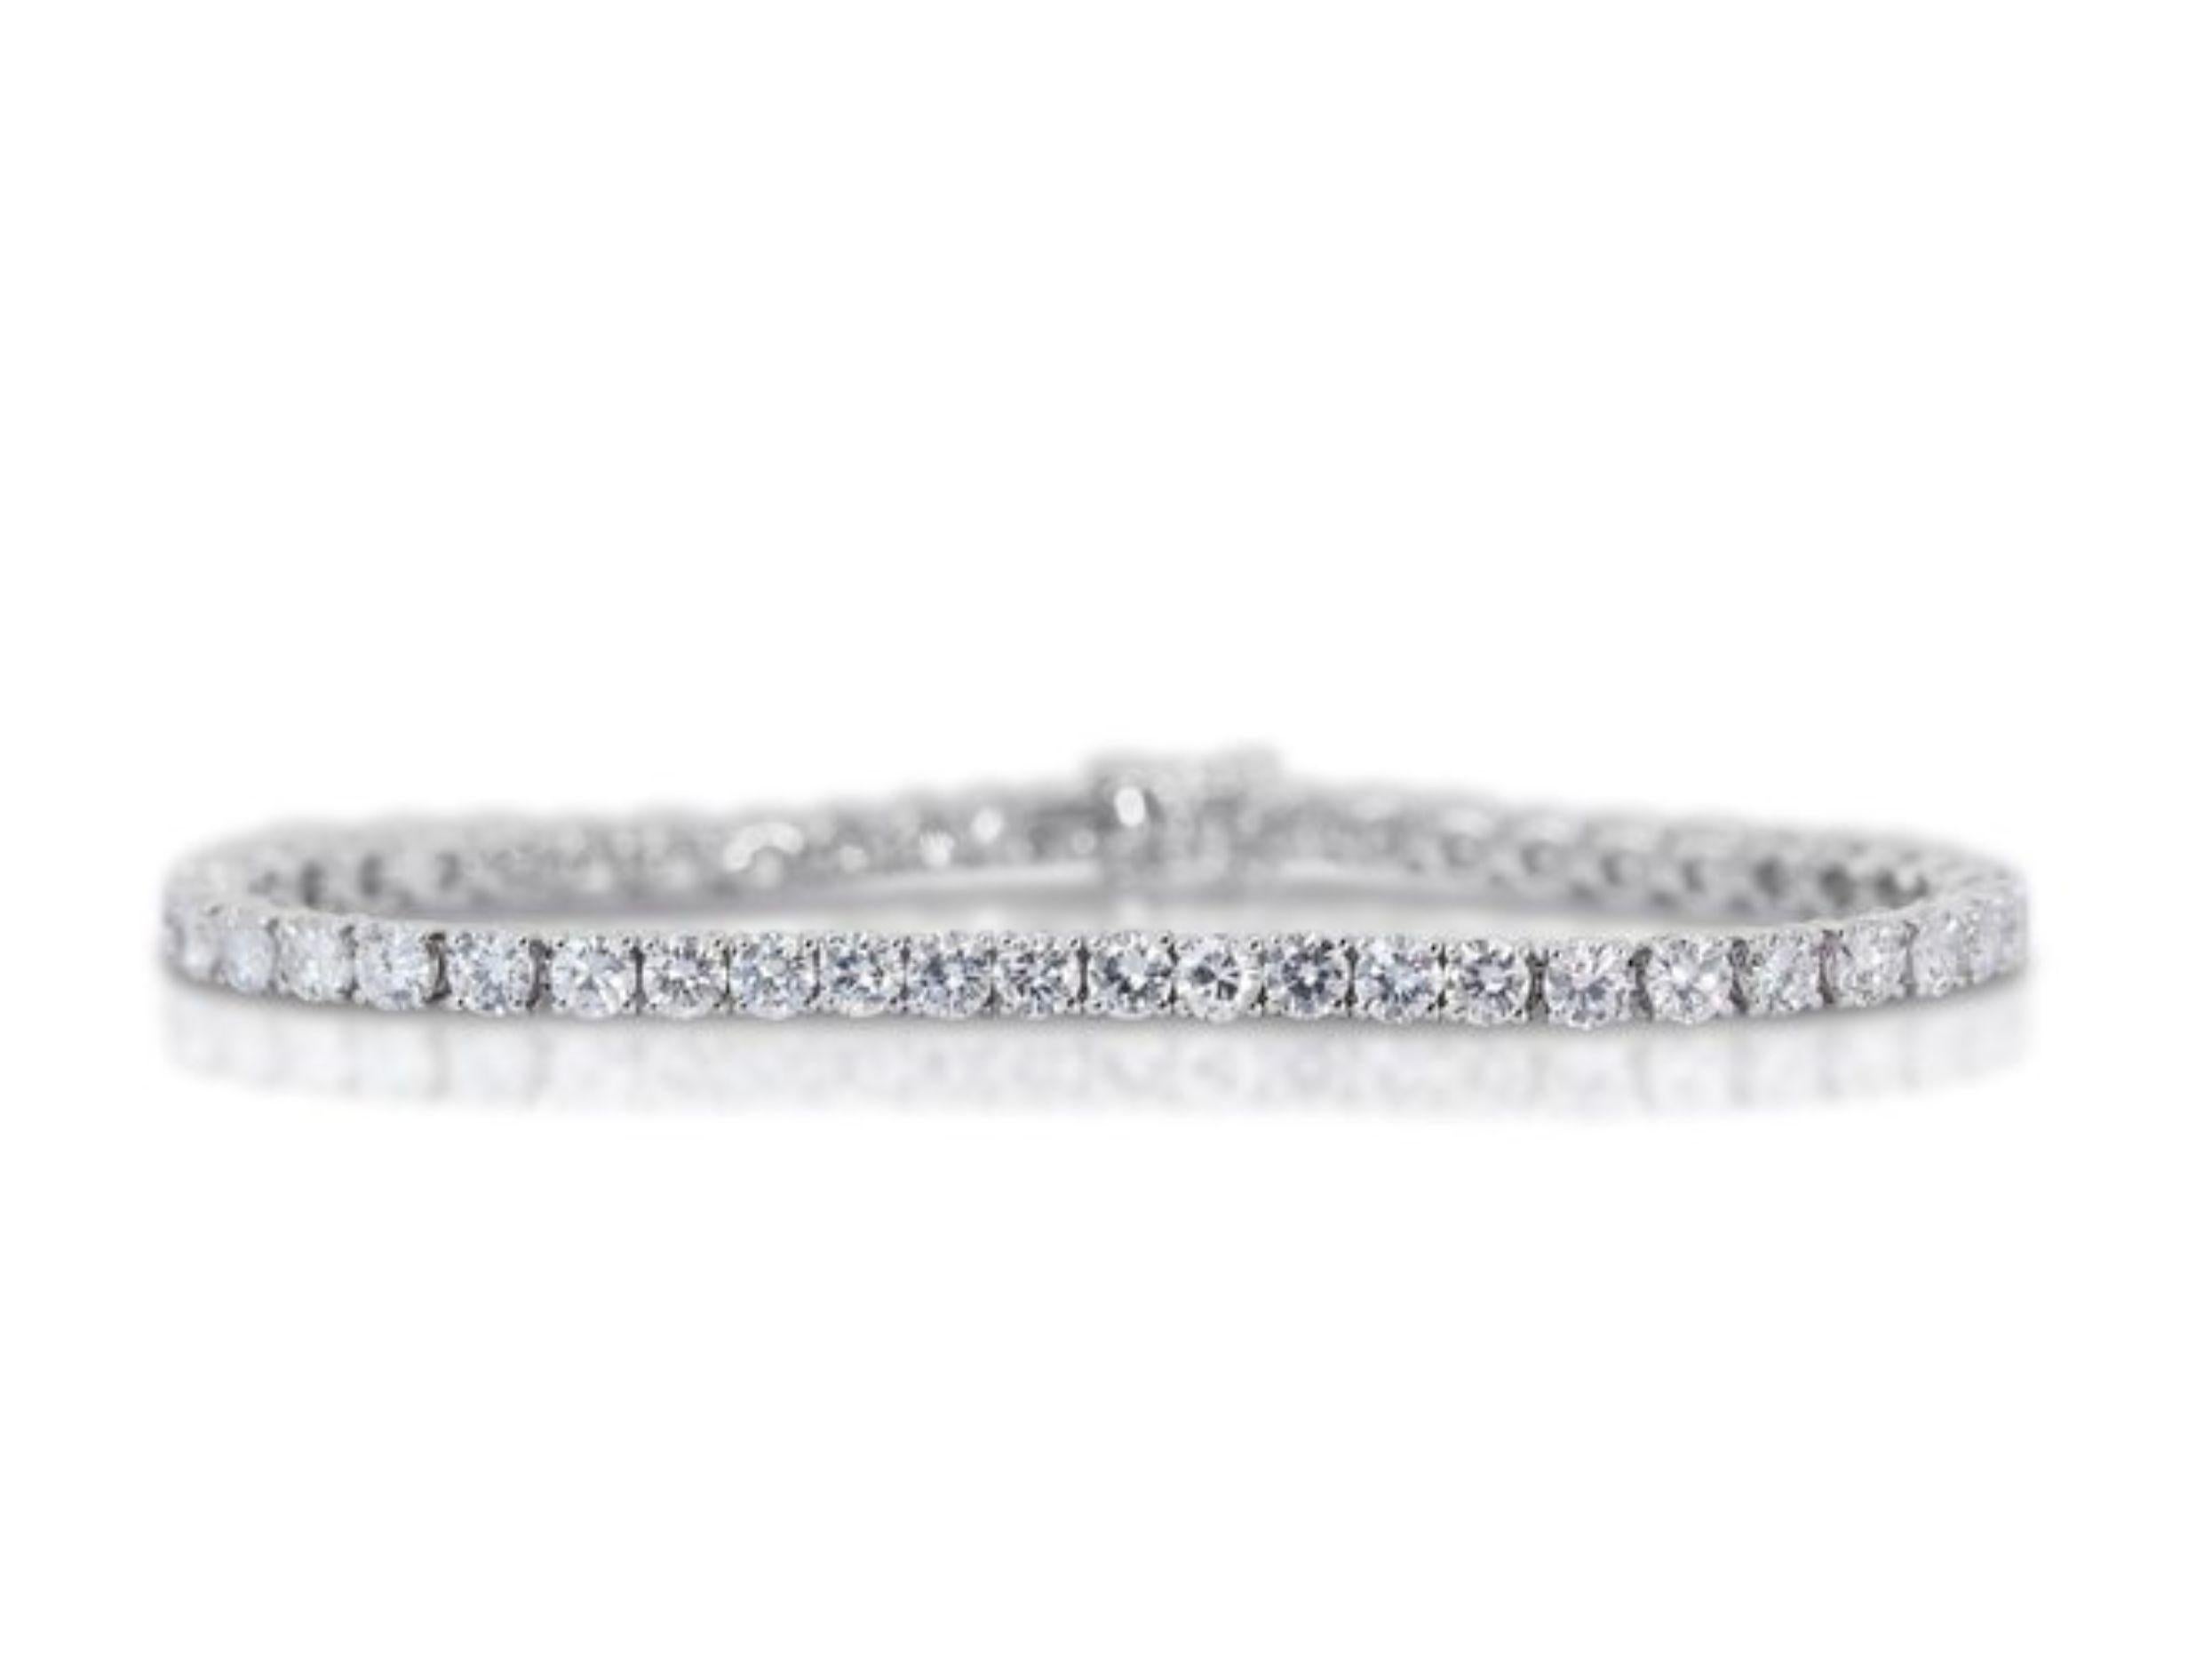 Ignite Eternal Radiance with This 8.88 Carat Diamond Tennis Bracelet in 14K White Gold (IGI Certified)
This bracelet is a breathtaking symphony of sparkle, featuring a mesmerizing 8.88 carats of round brilliant diamonds, certified by the renowned